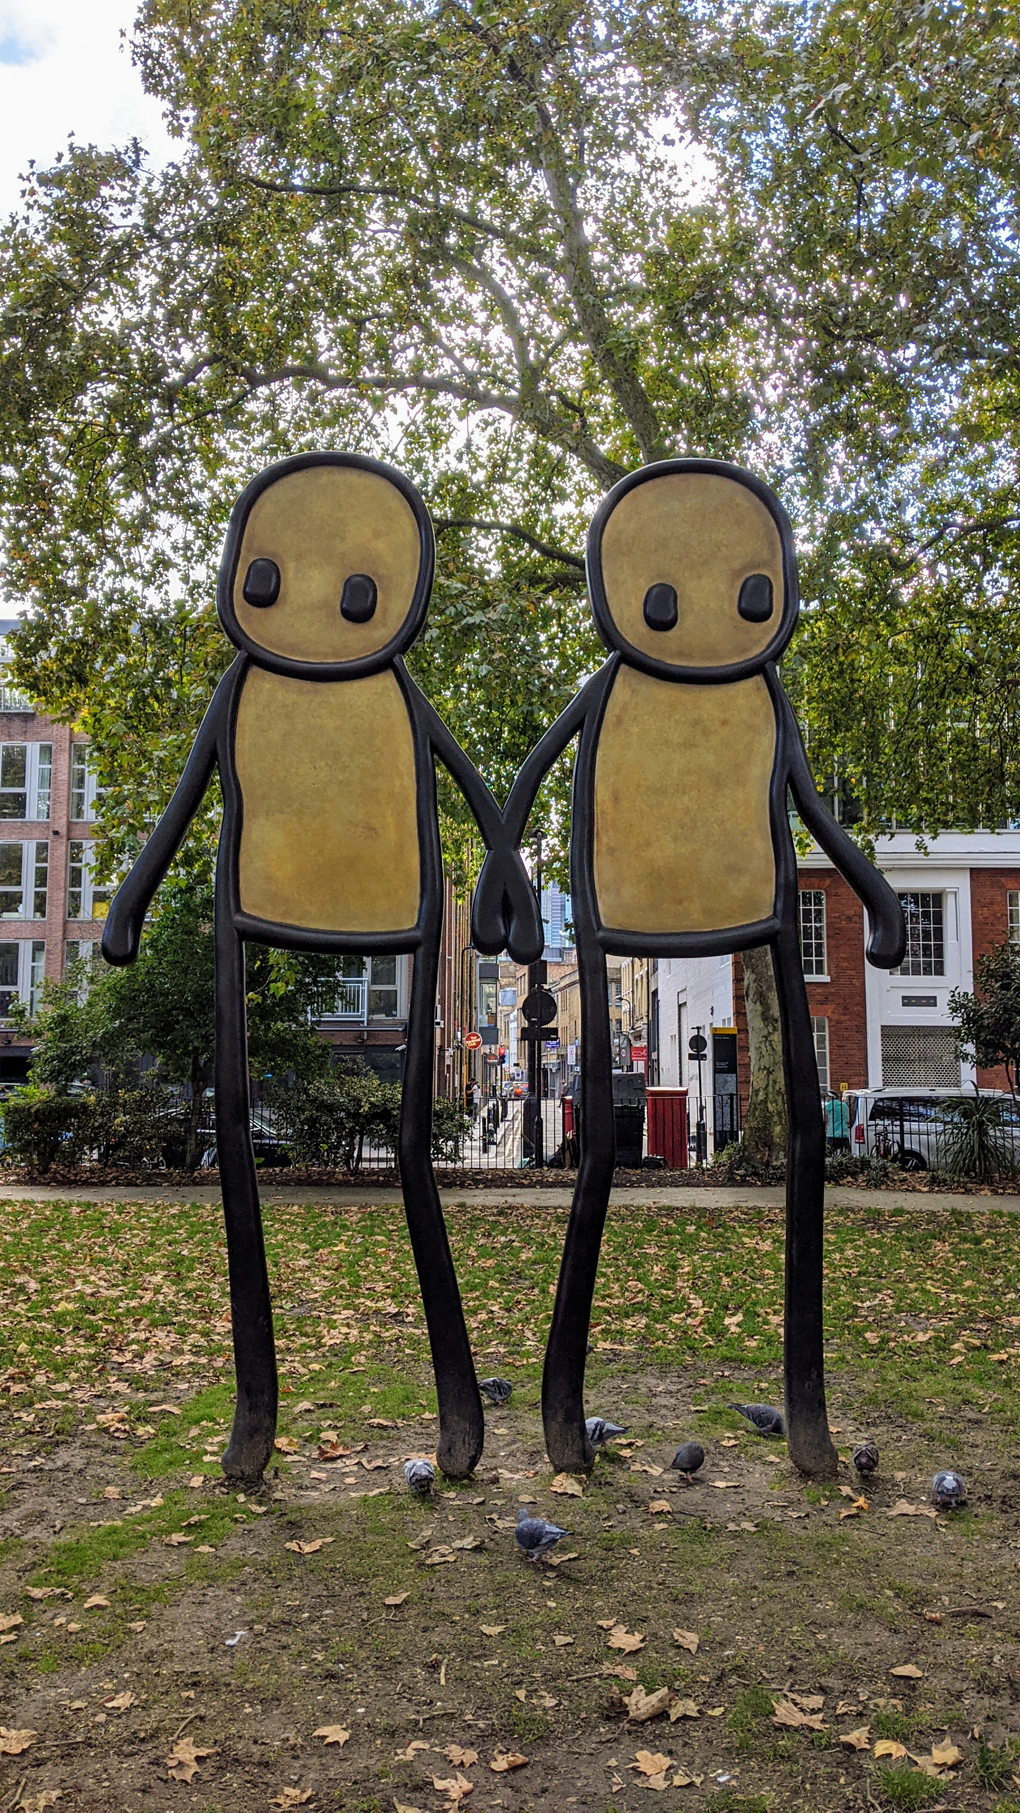 A tall sculpture of two stick figures holding hands.